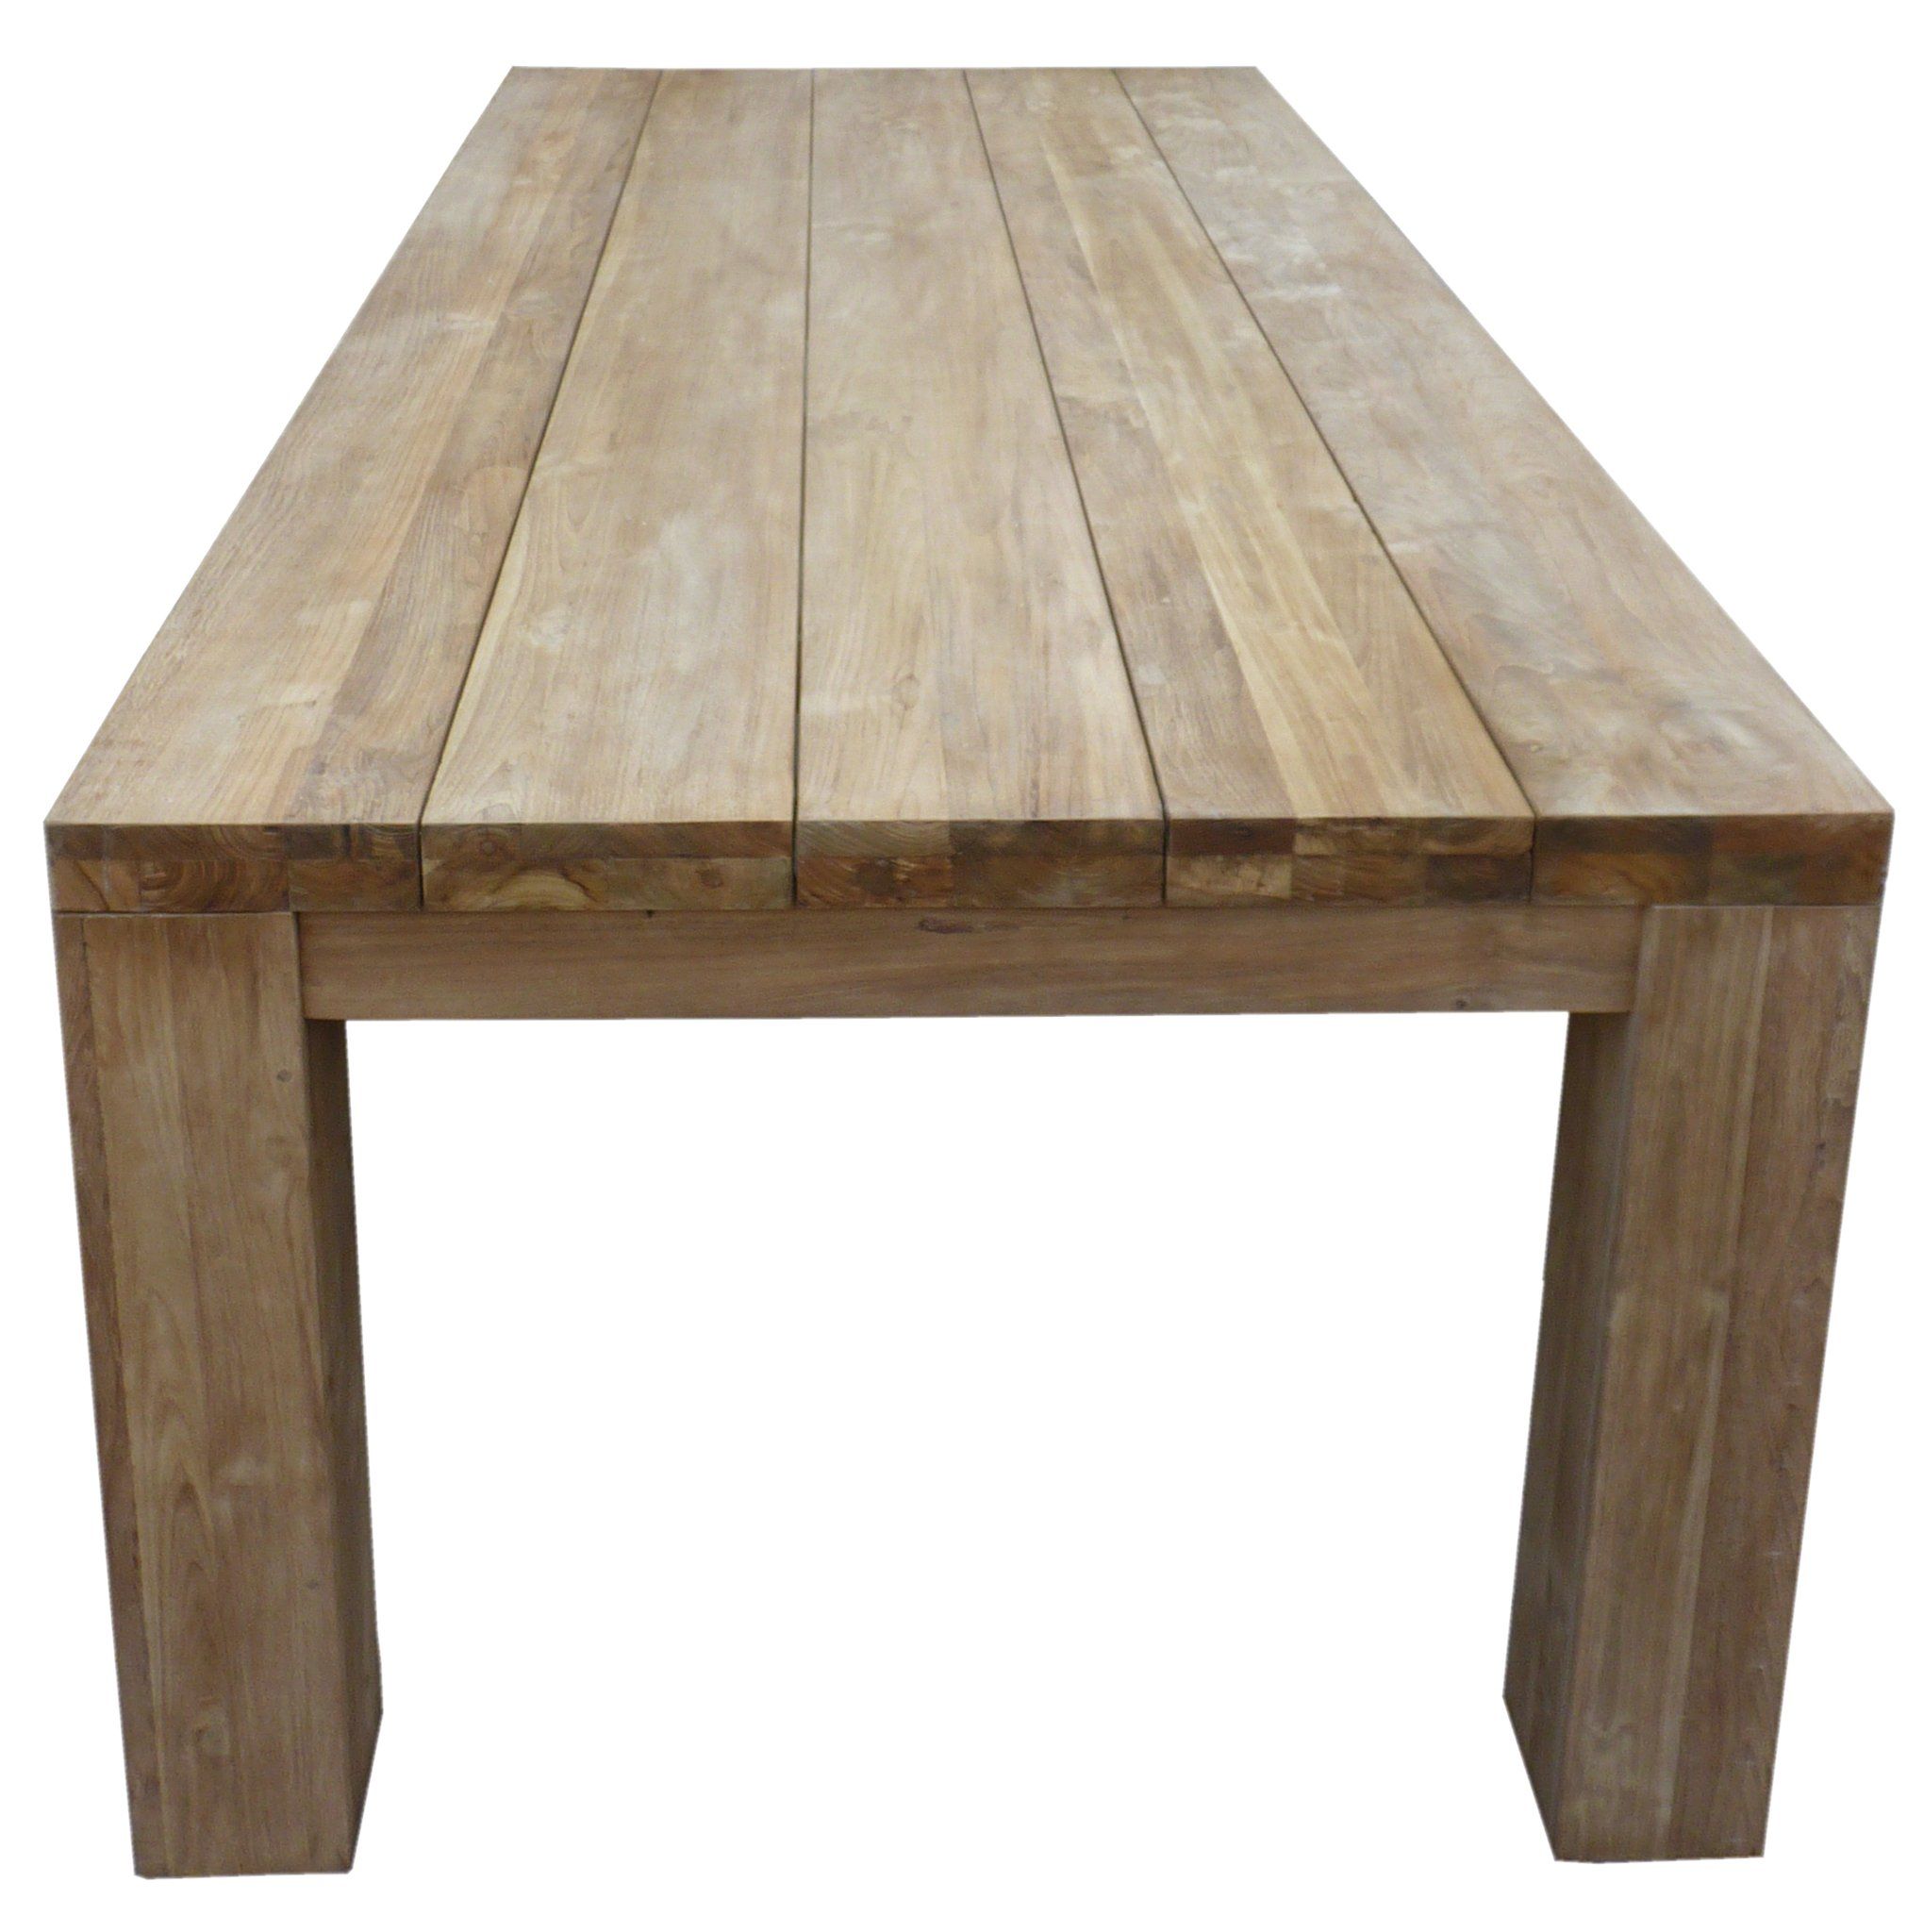 Recycled Teak Table